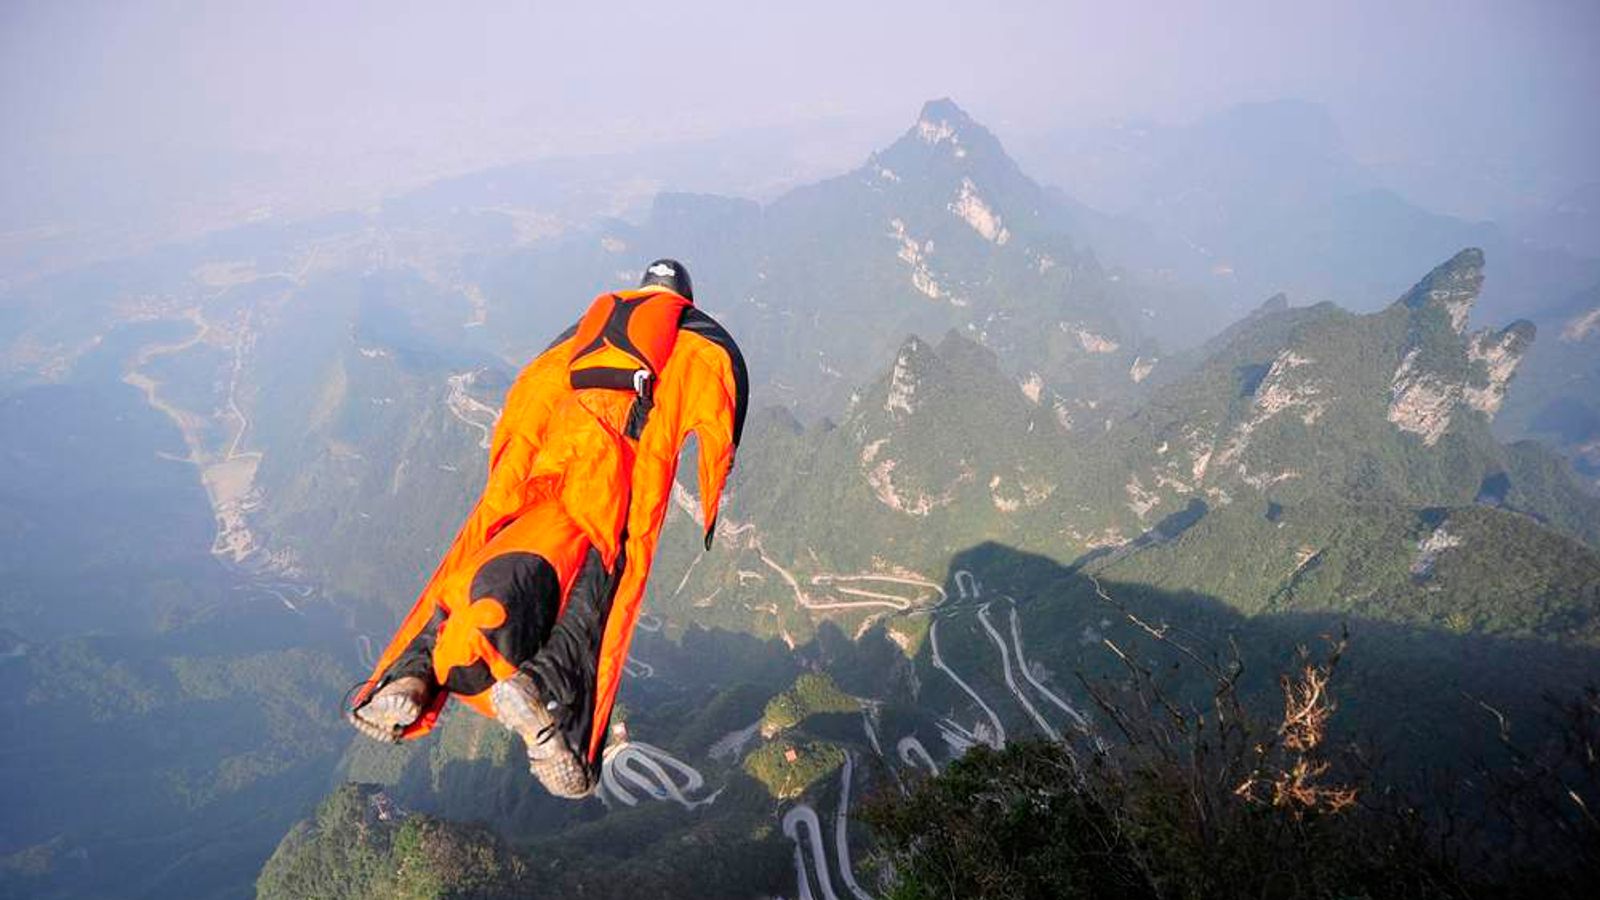 'Carnage' As Wingsuit BASE Jumping Death Spree Reaches 20